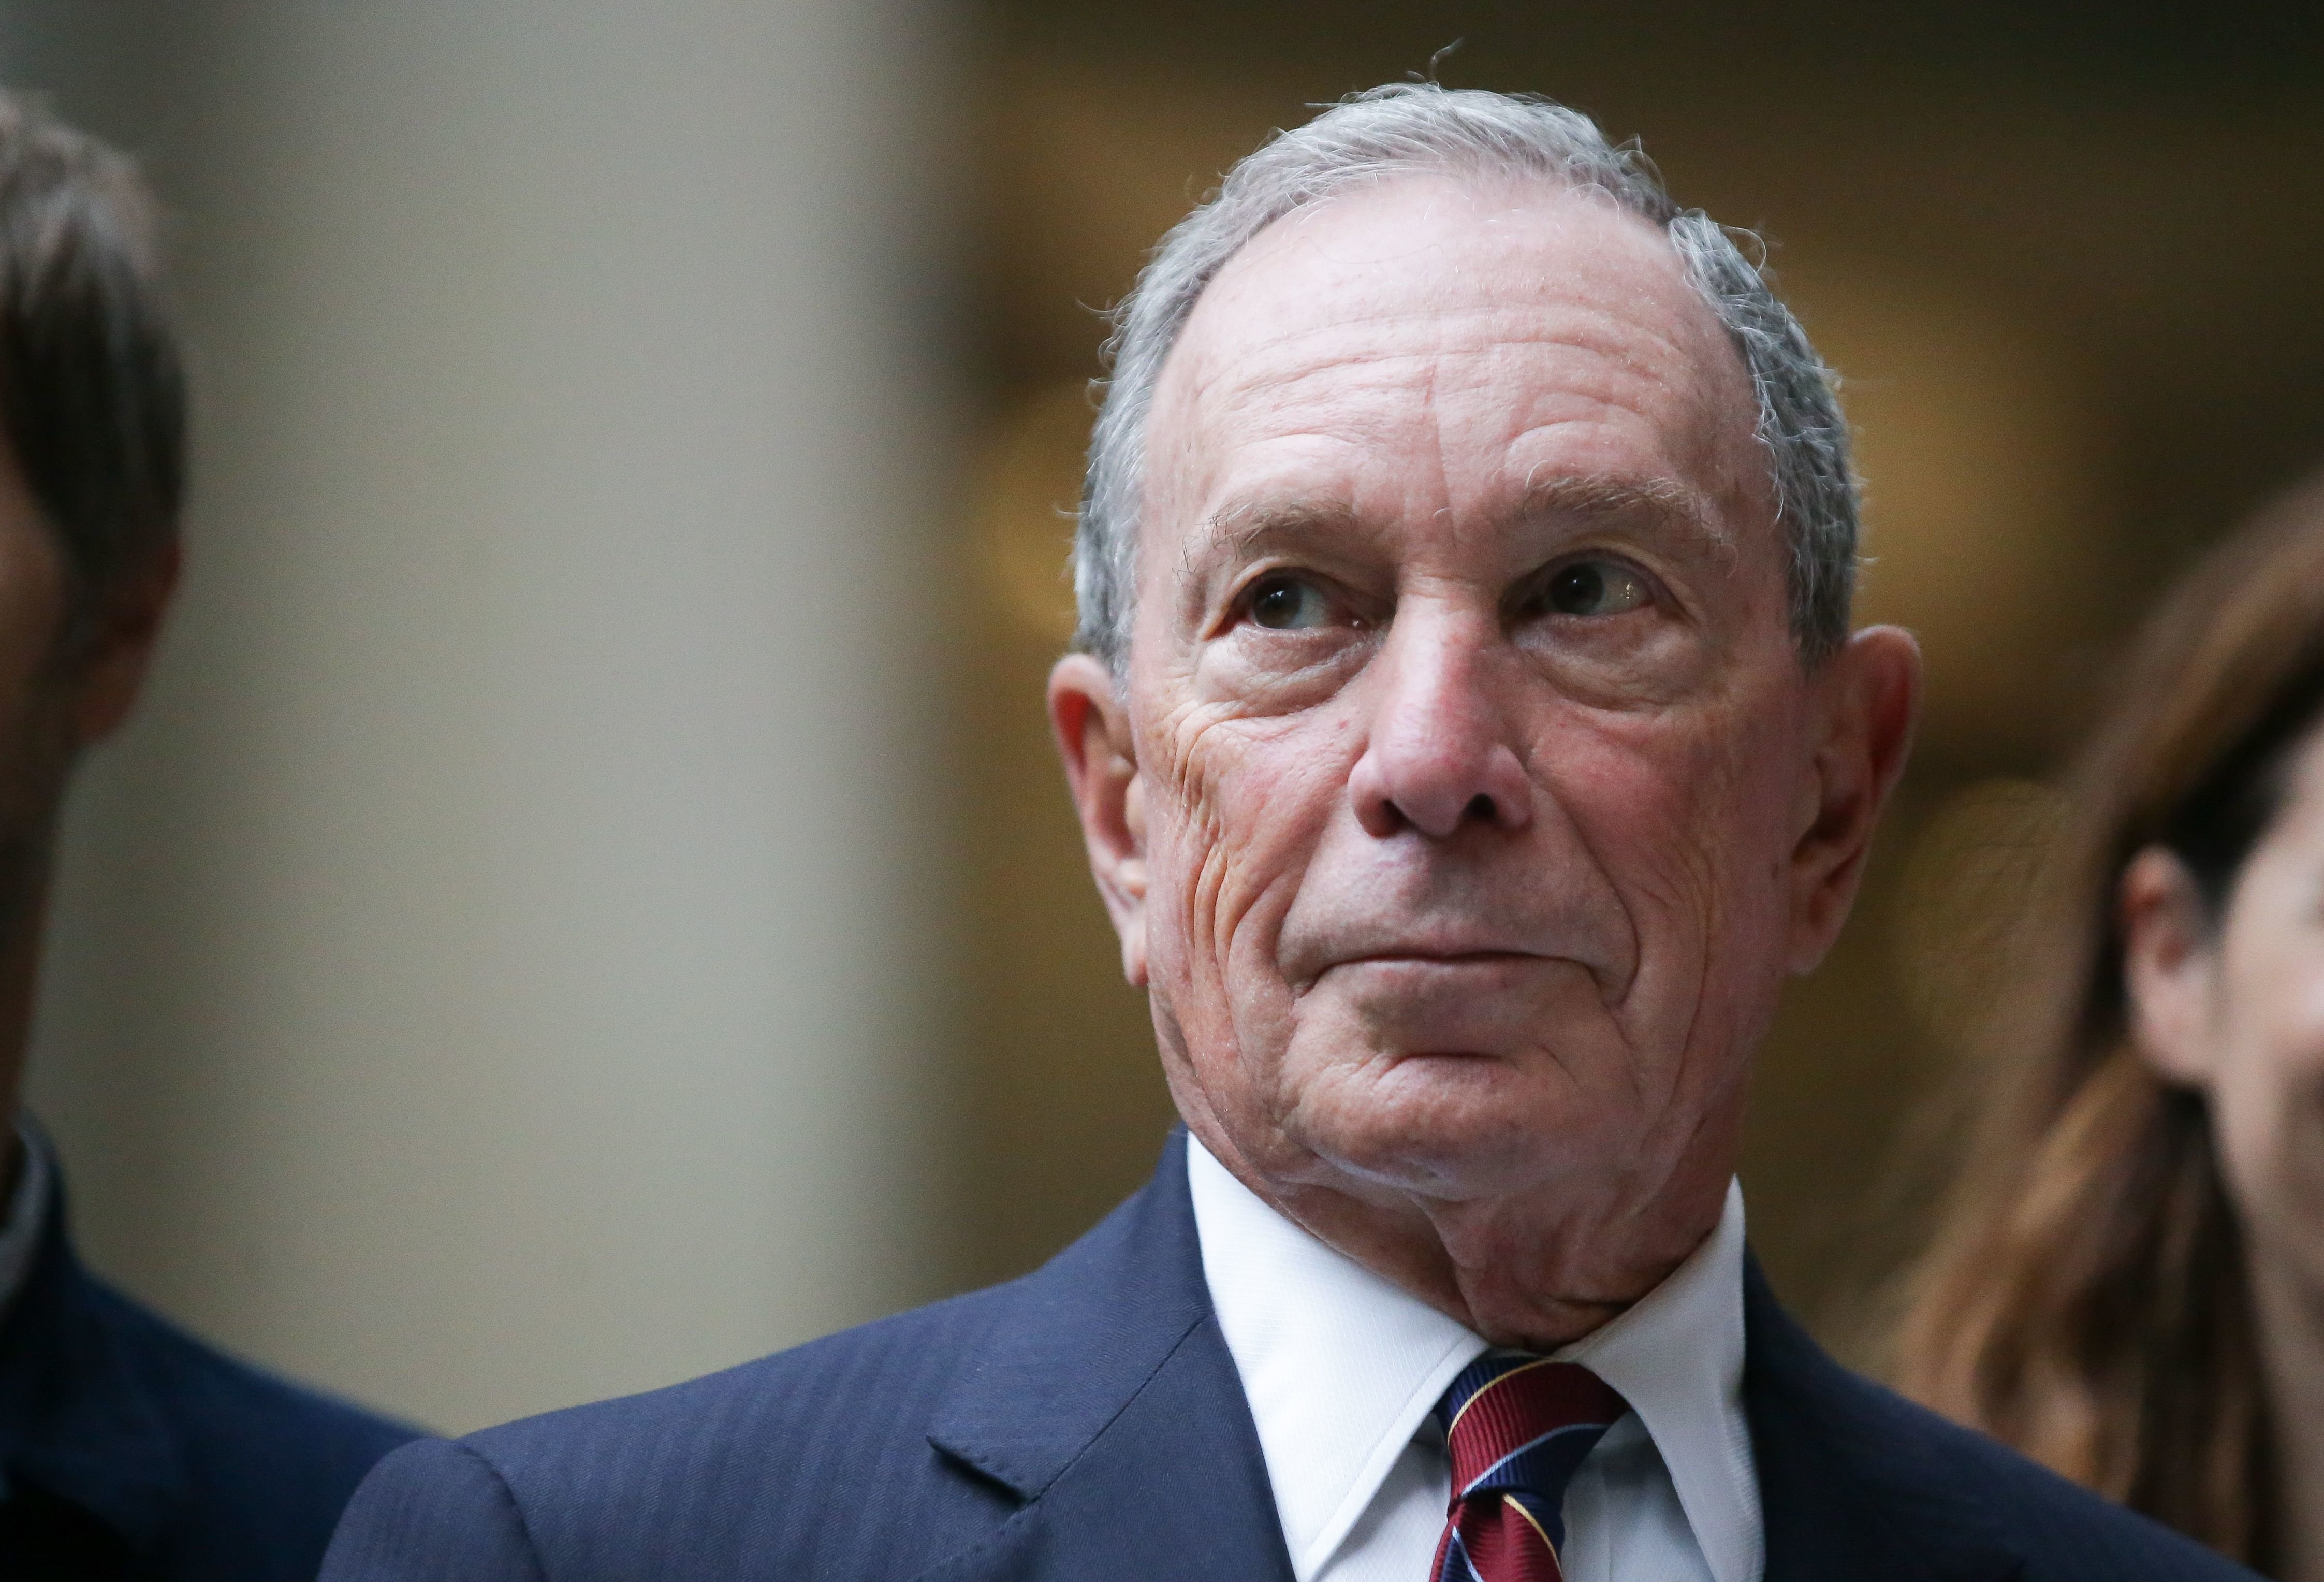 <strong>Michael Bloomberg on Brexit: 'It is really hard to understand why a country that was doing so well wanted to ruin it'</strong>